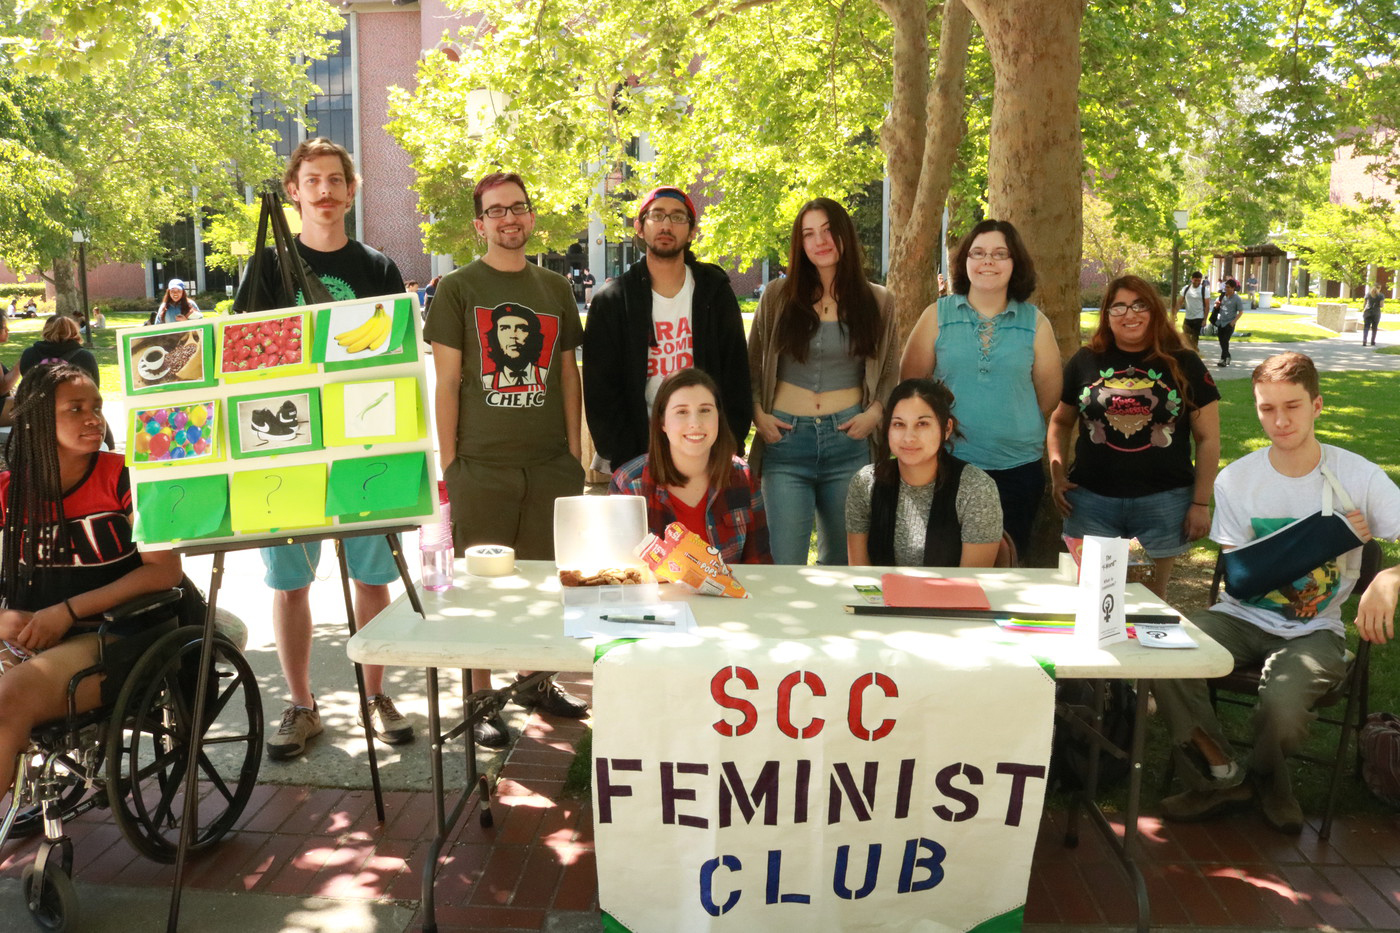 Members of the Feminist Club gather in the Quad at City College to spread awareness about issues. Photo by Reanna Simmons. | rsimmonsexpress@gmail.com